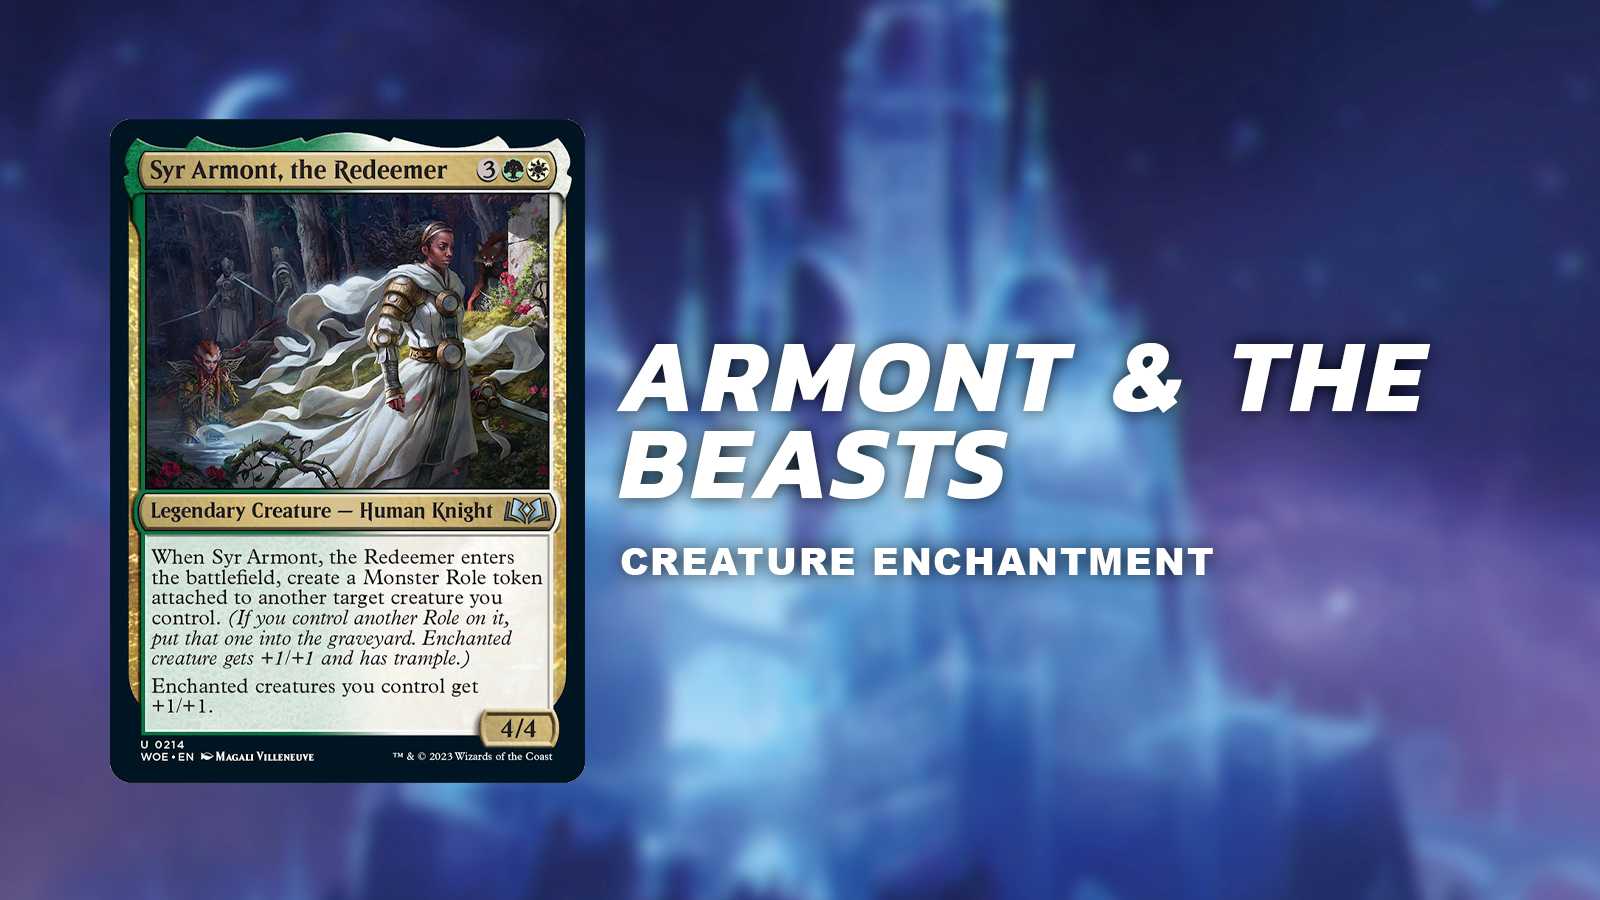 armont & the beasts (creature enchantment)